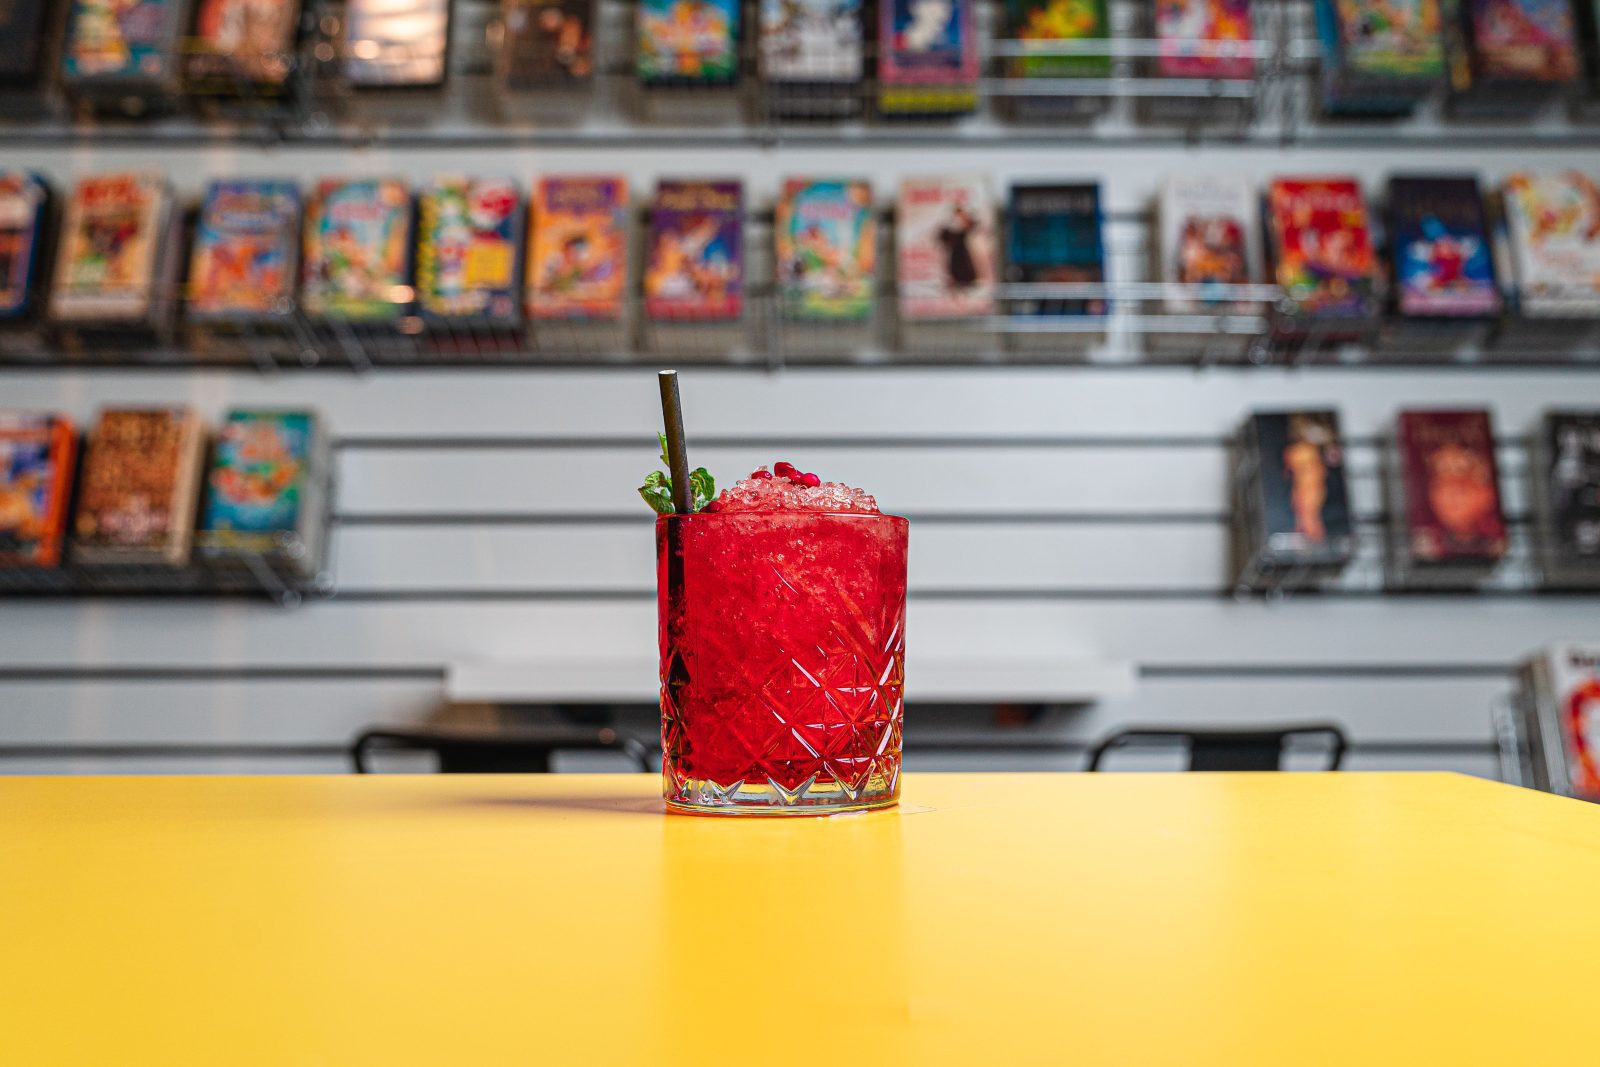 A retro Blockbuster-themed bar is opening in Manchester, The Manc